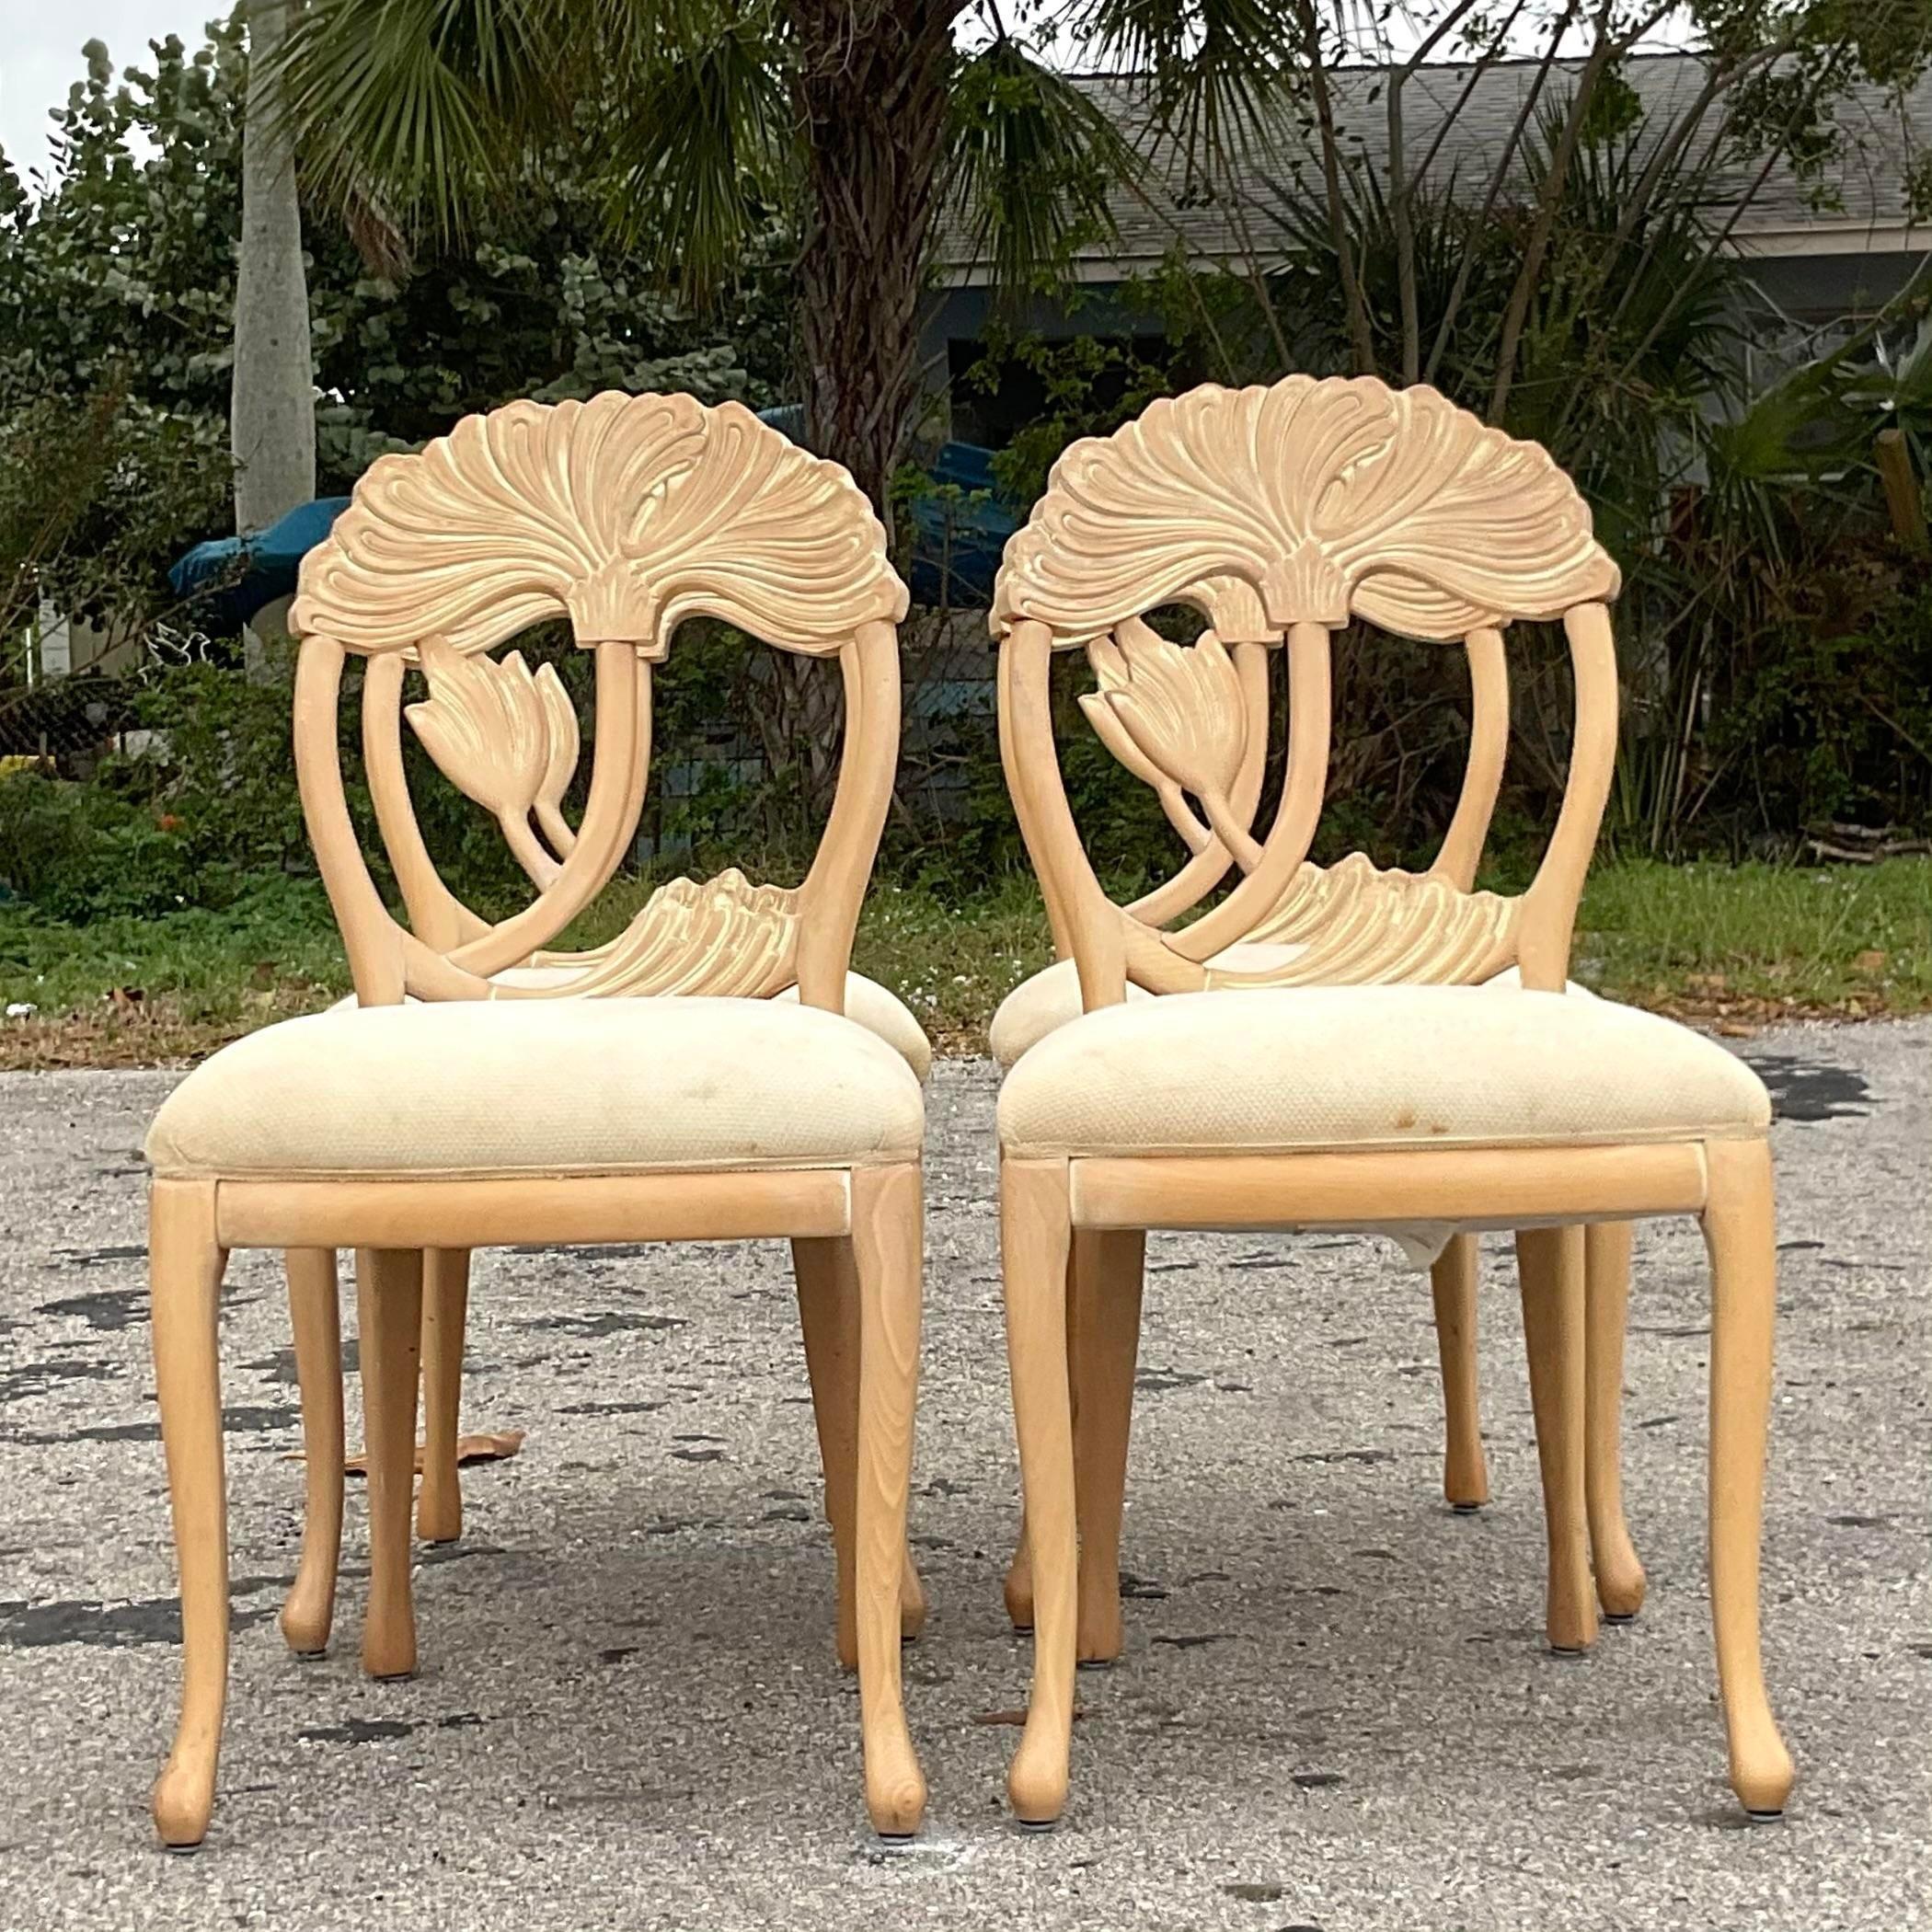 Vintage Coastal Andre Originals Carved Lily Dining Chairs - Set of 4 For Sale 1